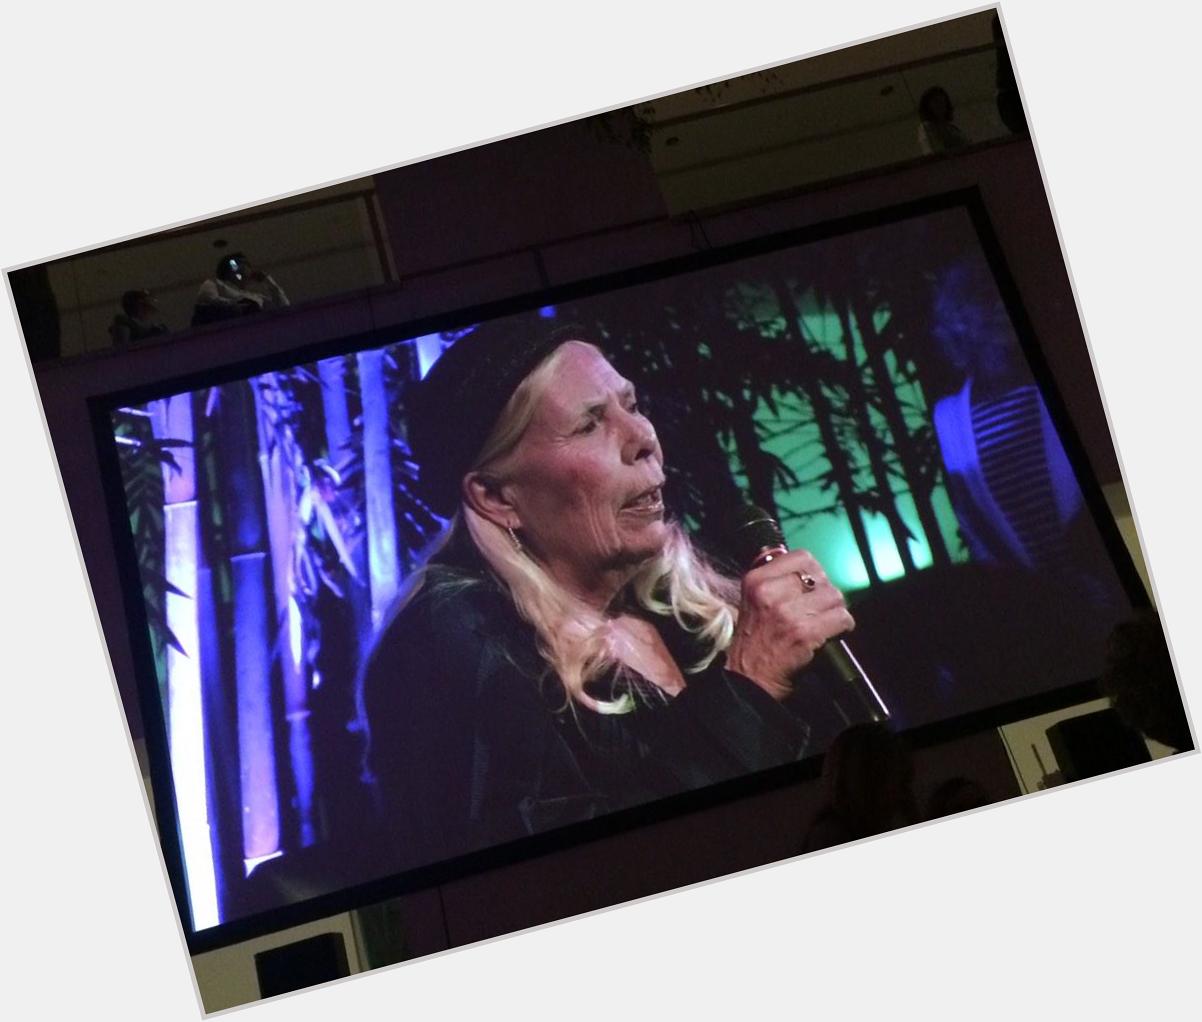 Went to wish a happy birthday to Joni Mitchell at the 